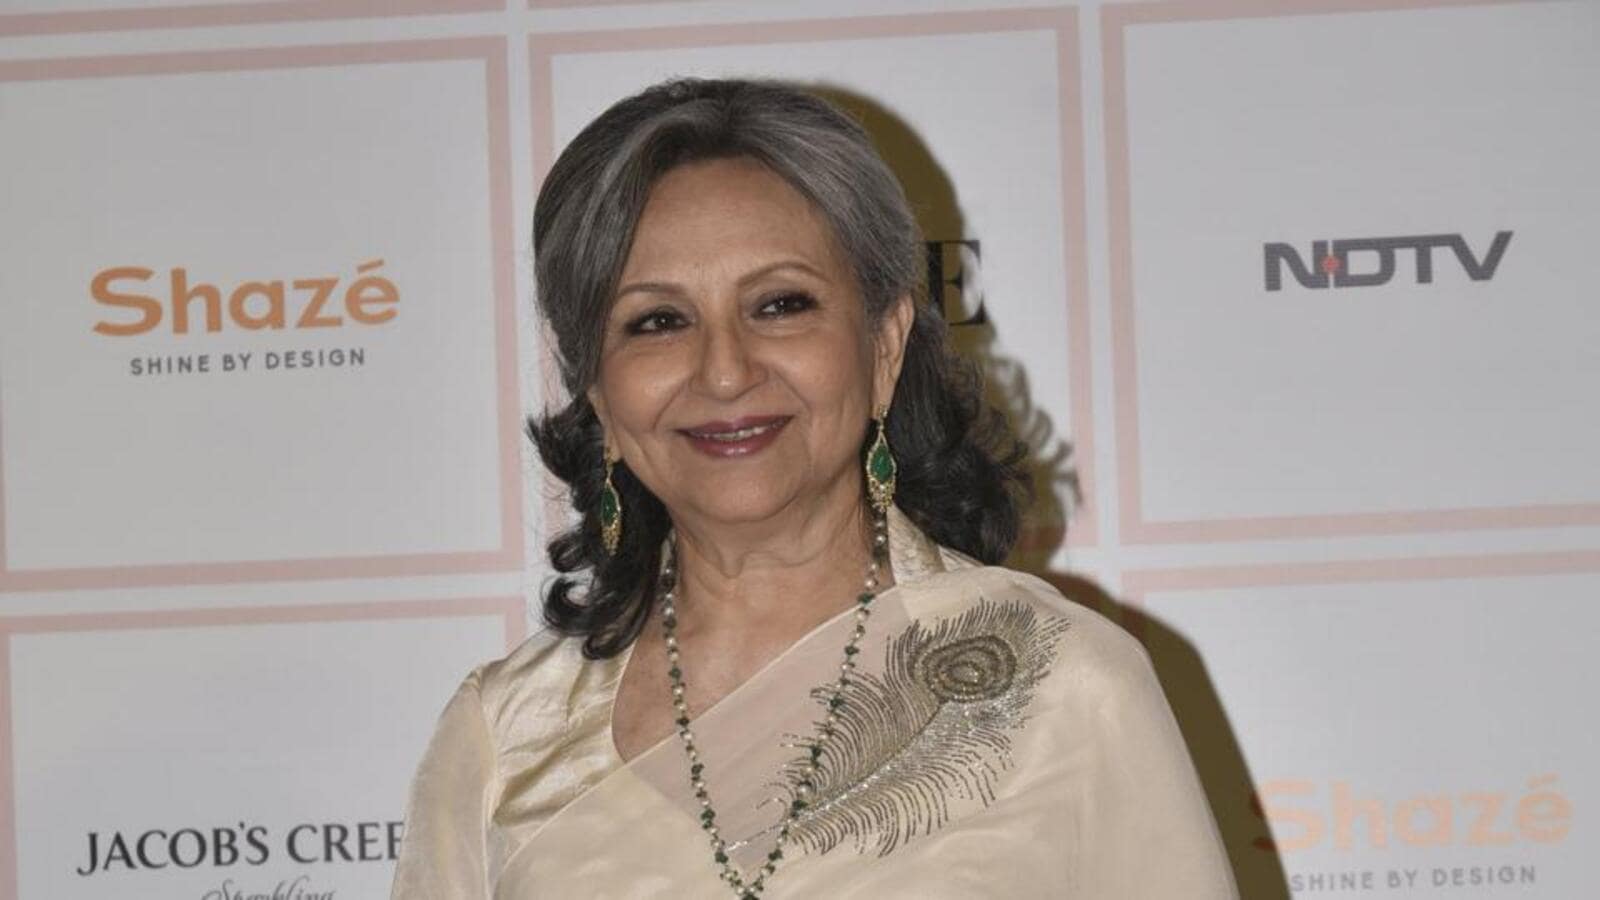 Sharmila Tagore on returning to films: Not looking to work just for the heck of it as that part of me is over | Bollywood - Hindustan Times